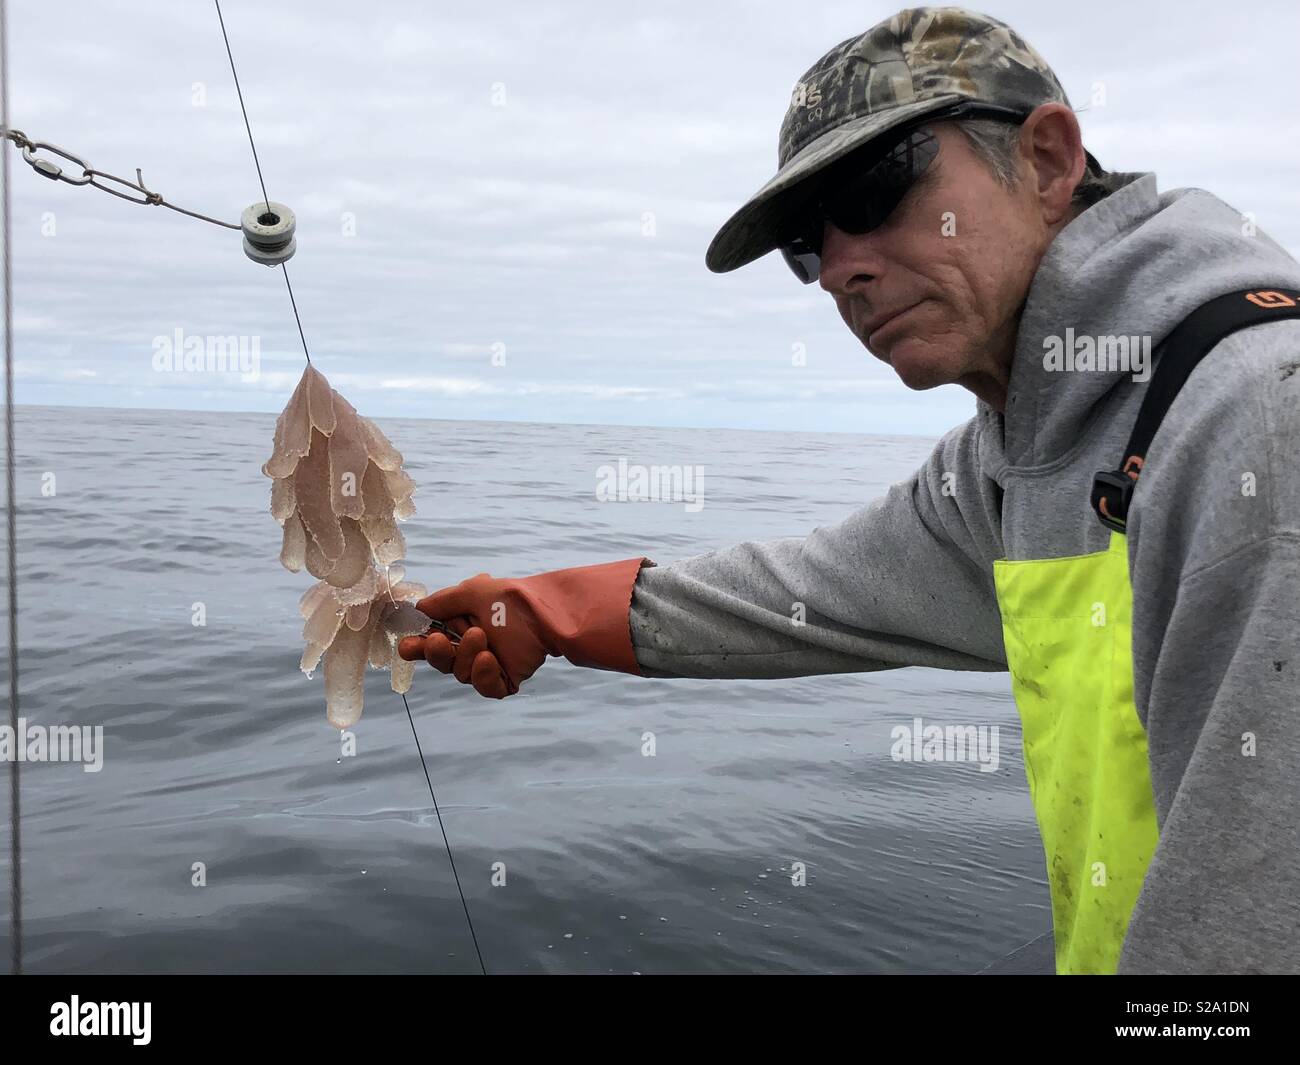 Handsome senior commercial fishing displays a line filled with pyrosomes, a jelly-like tubular invertebrate causing havoc to fisheries on the North Pacific Ocean in unprecedented numbers. Stock Photo